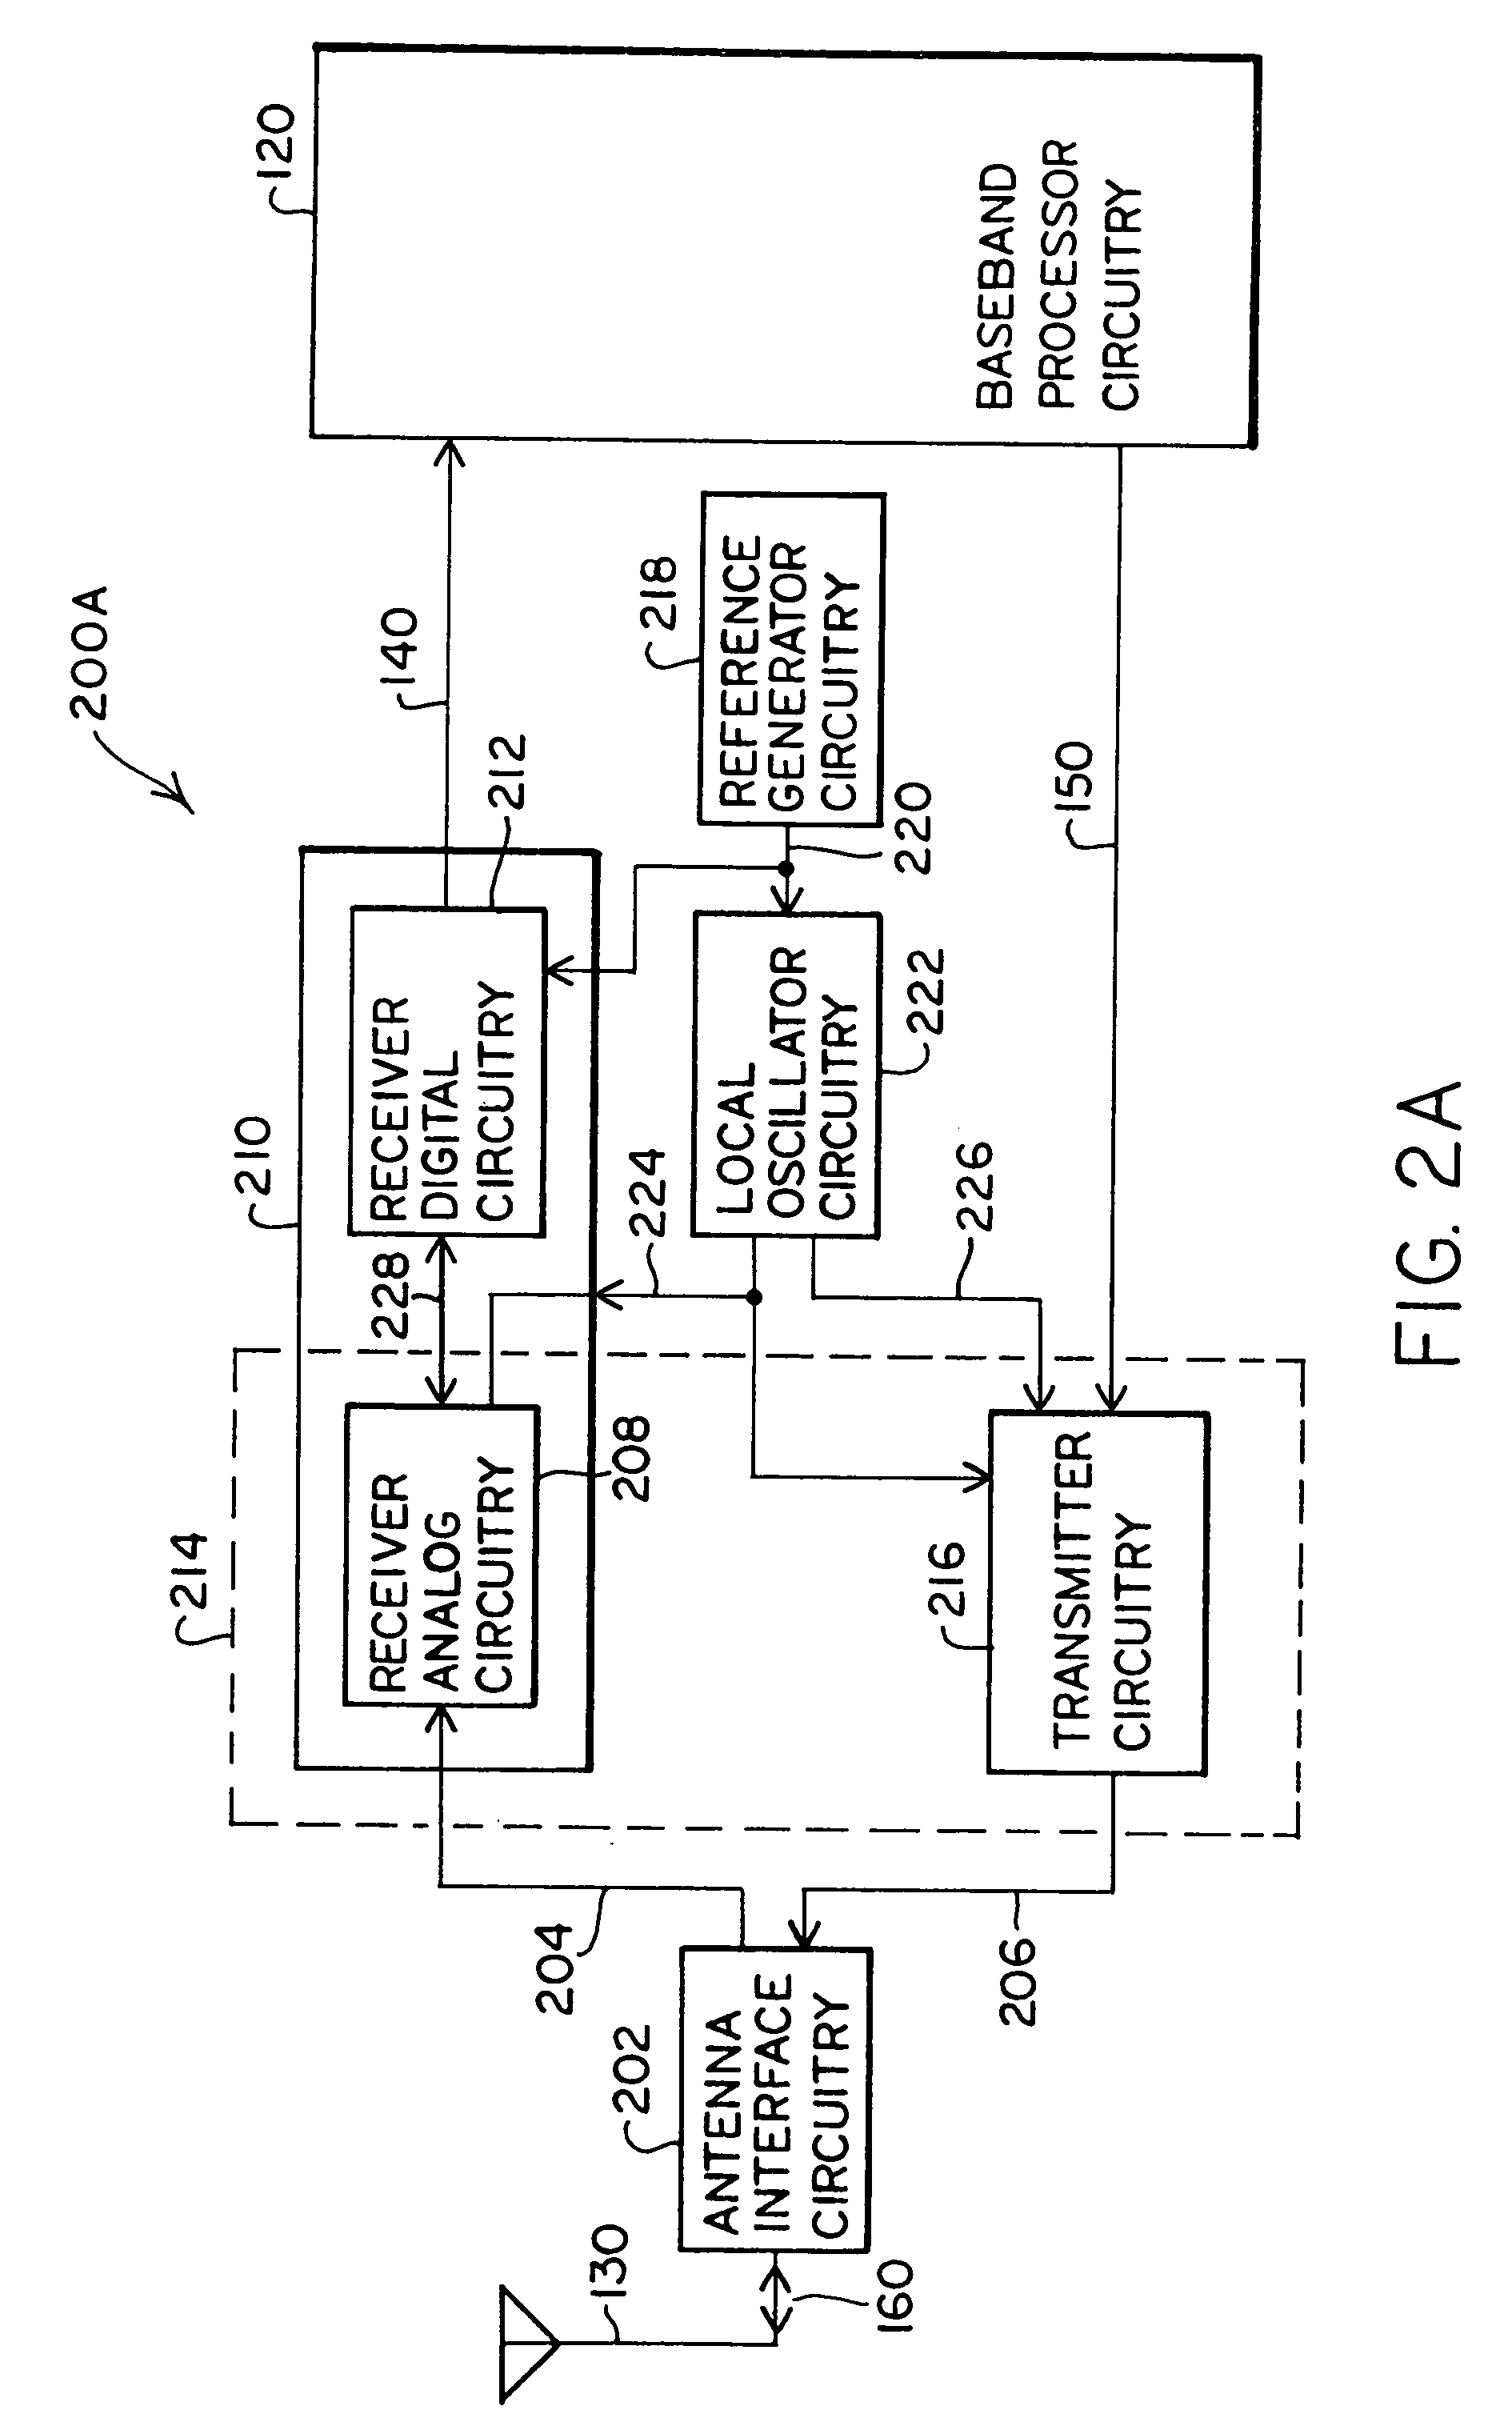 Frequency modification circuitry for use in radio-frequency communication apparatus and associated methods